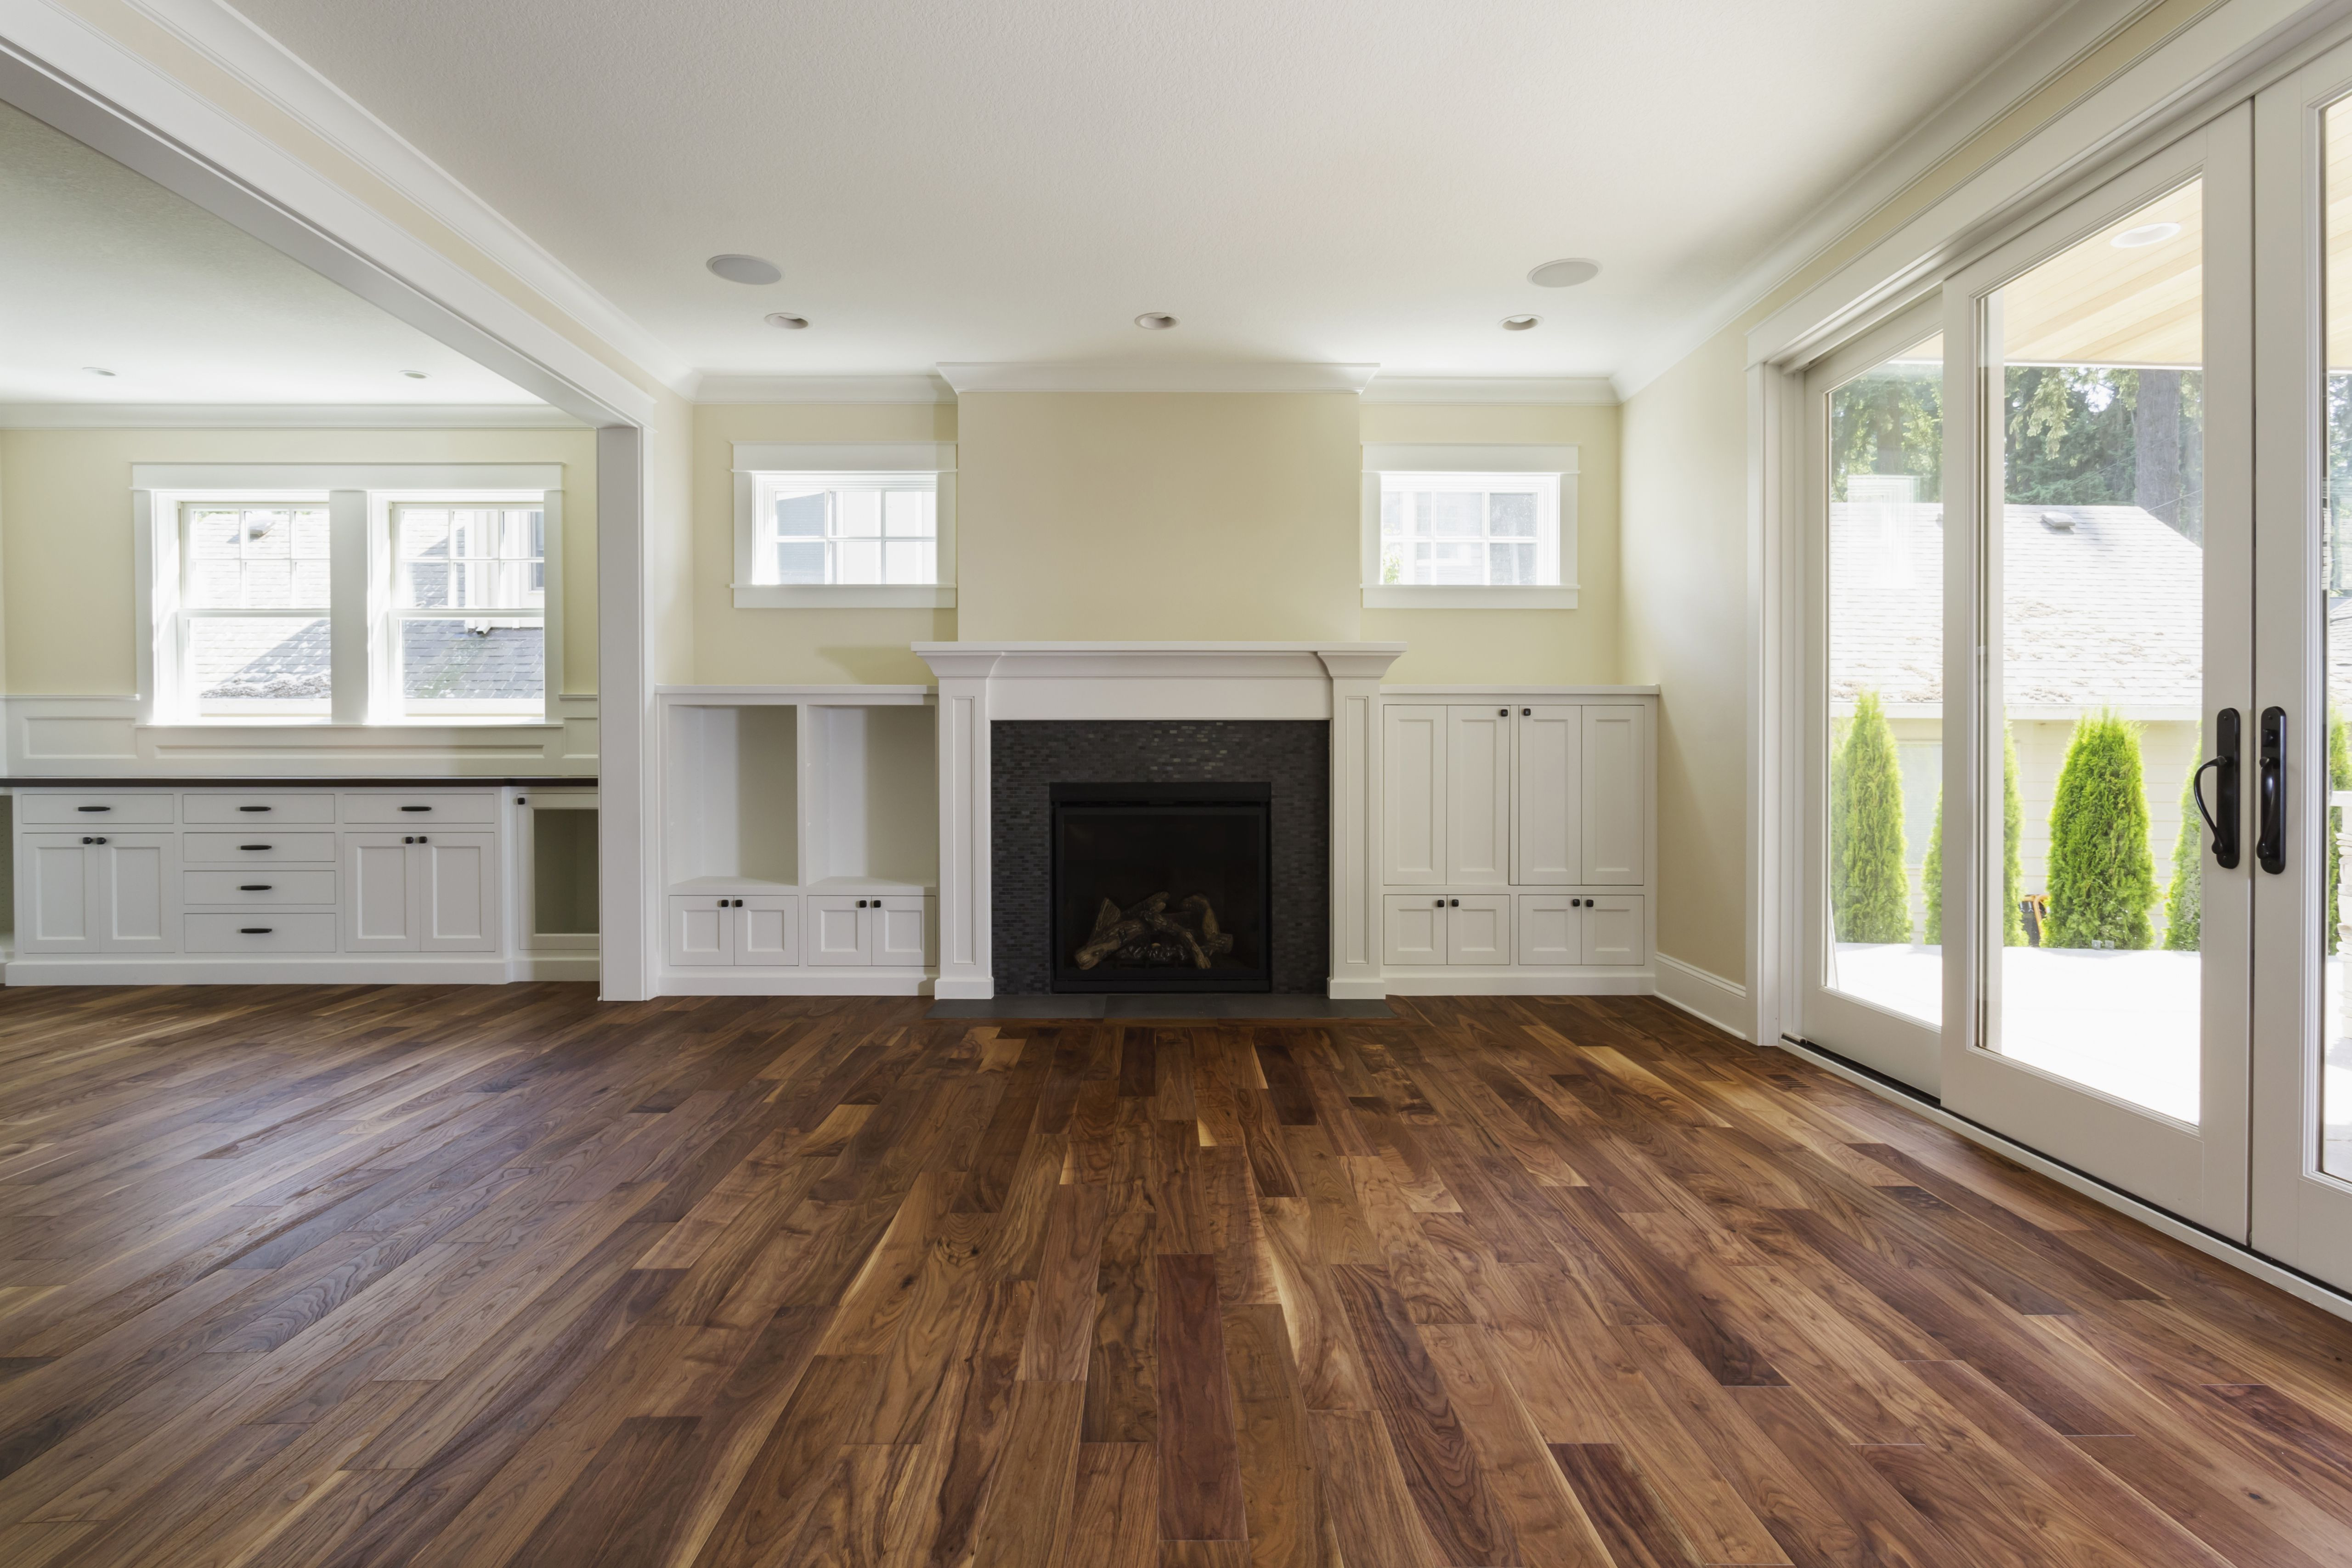 26 Trendy Multi Colored Hardwood Floors 2024 free download multi colored hardwood floors of the pros and cons of prefinished hardwood flooring pertaining to fireplace and built in shelves in living room 482143011 57bef8e33df78cc16e035397